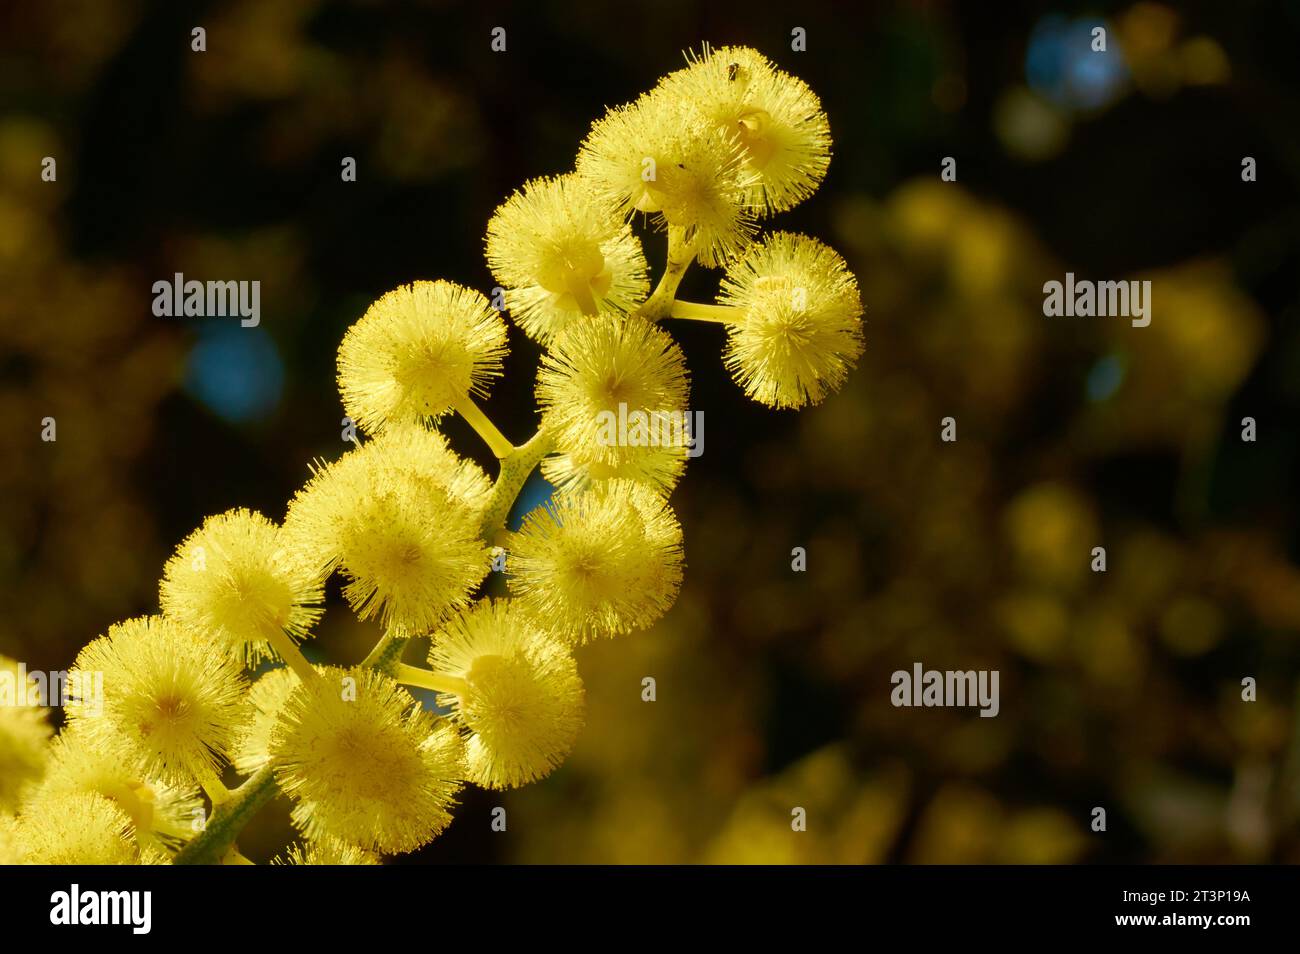 Close-up of the flowers of Glowing Wattle, Acacia celastrifolia, native to south-west Western Australia, backlit by sunlight in the Perth Hills. Stock Photo